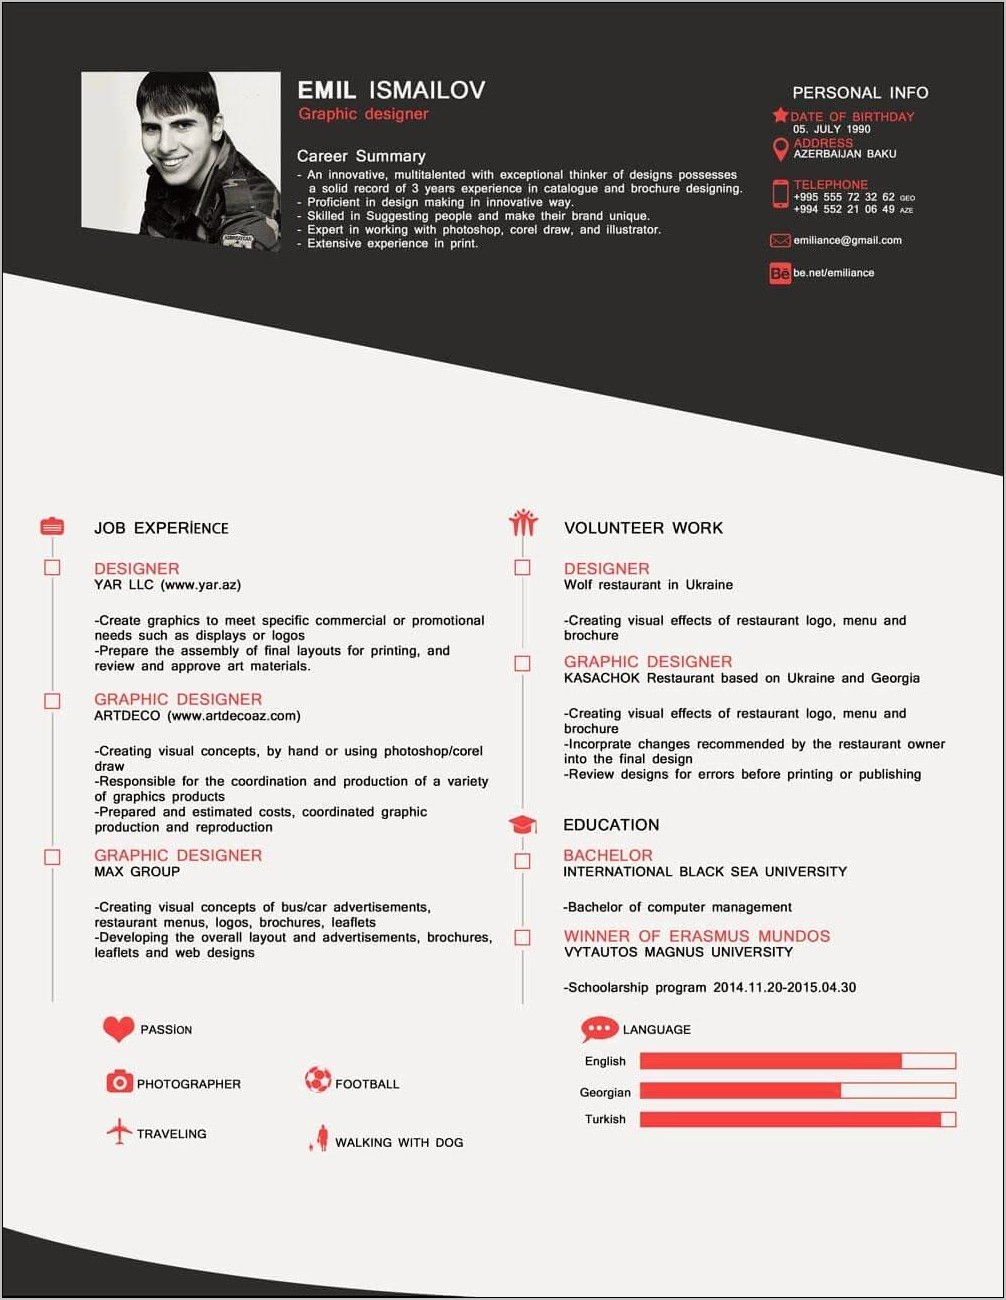 Create And Print Resume Online For Free